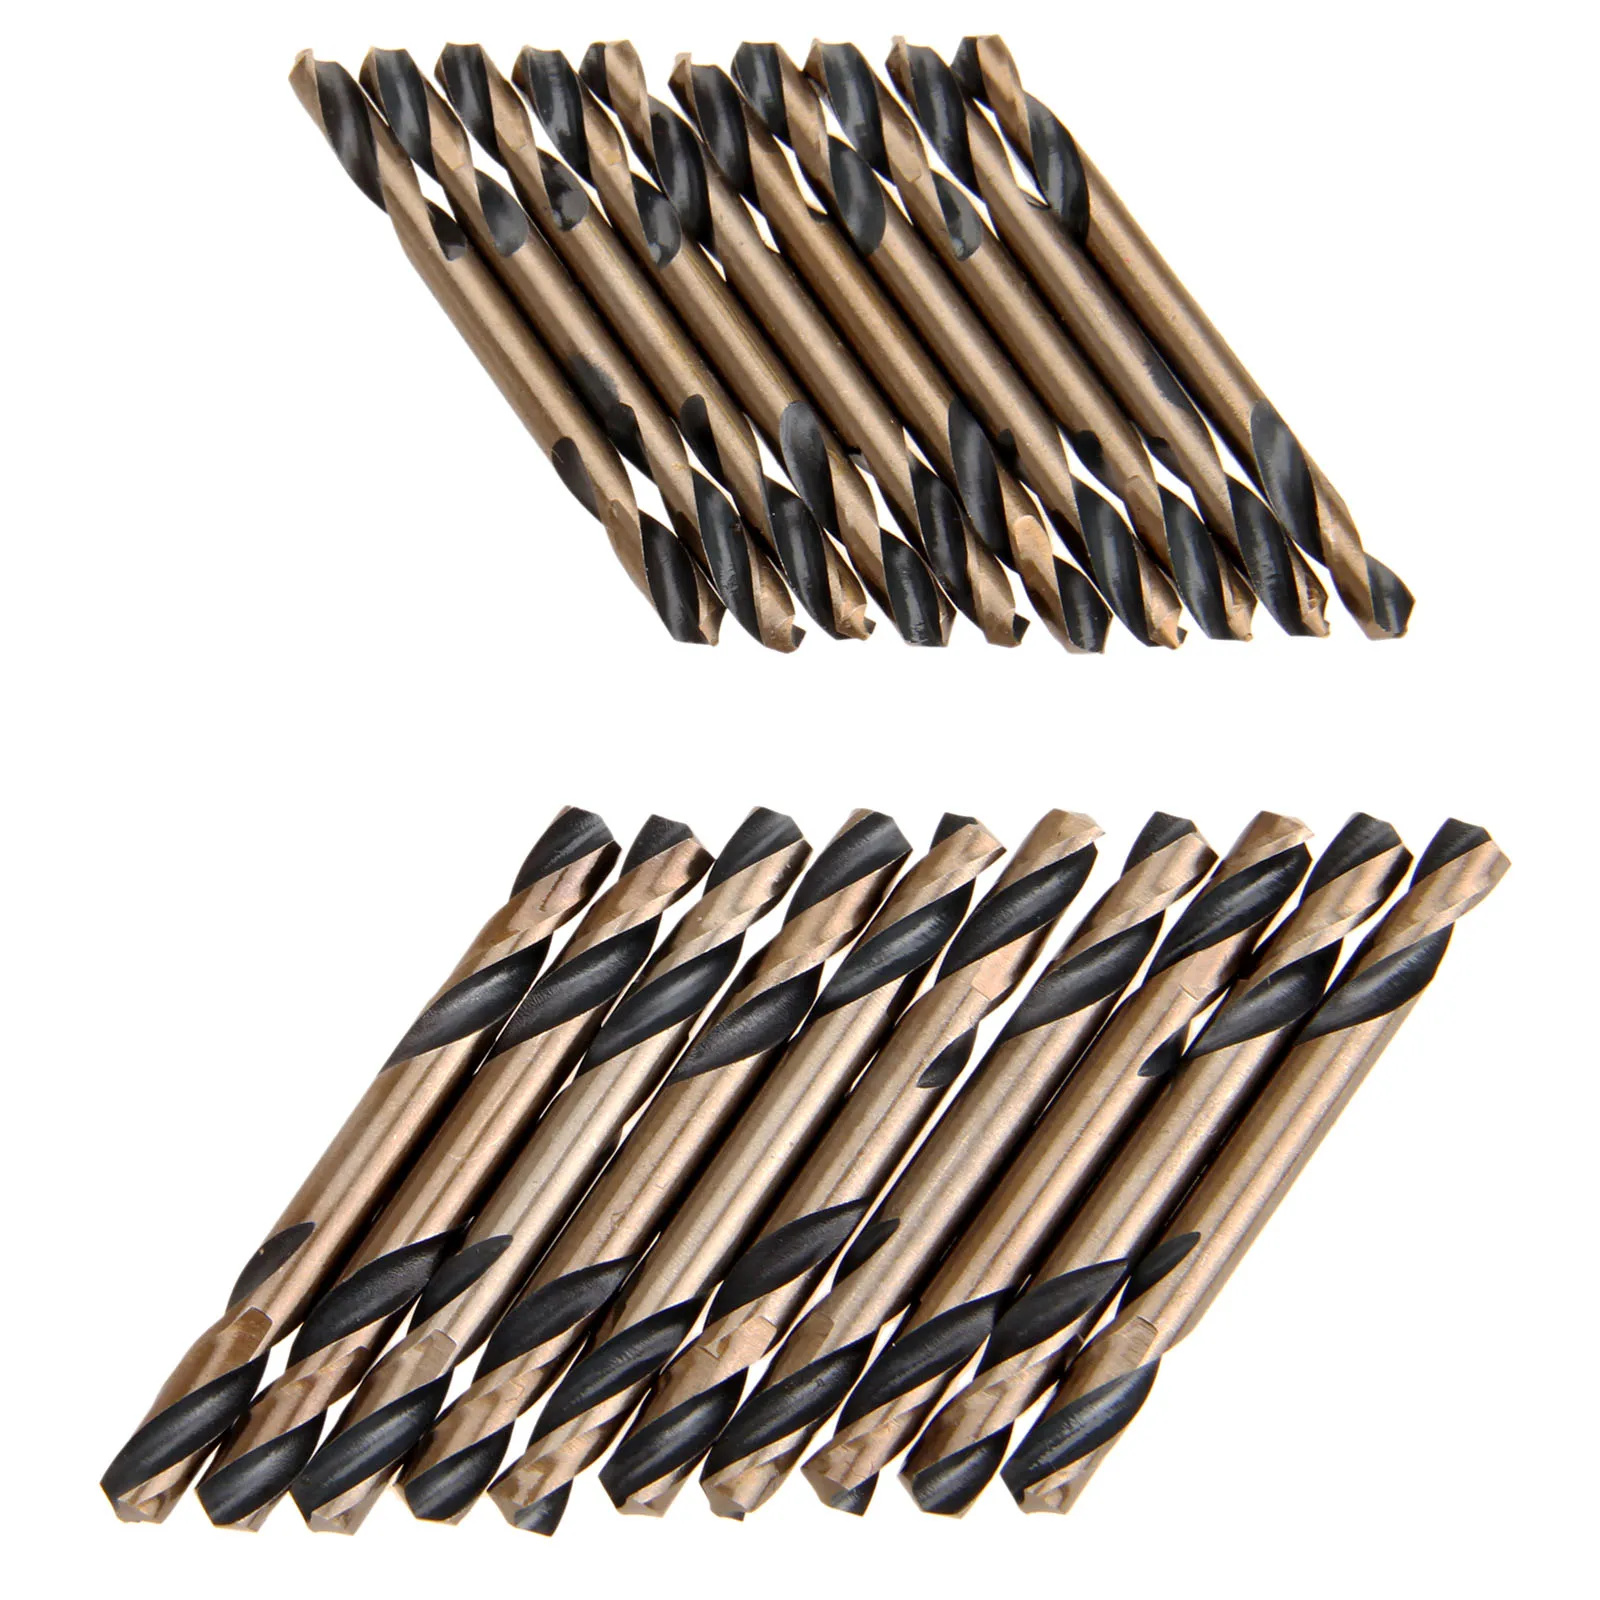 10 5.2mm HSS Double Twist Drill Bit Set for Metal Carbon Steel Stainless 